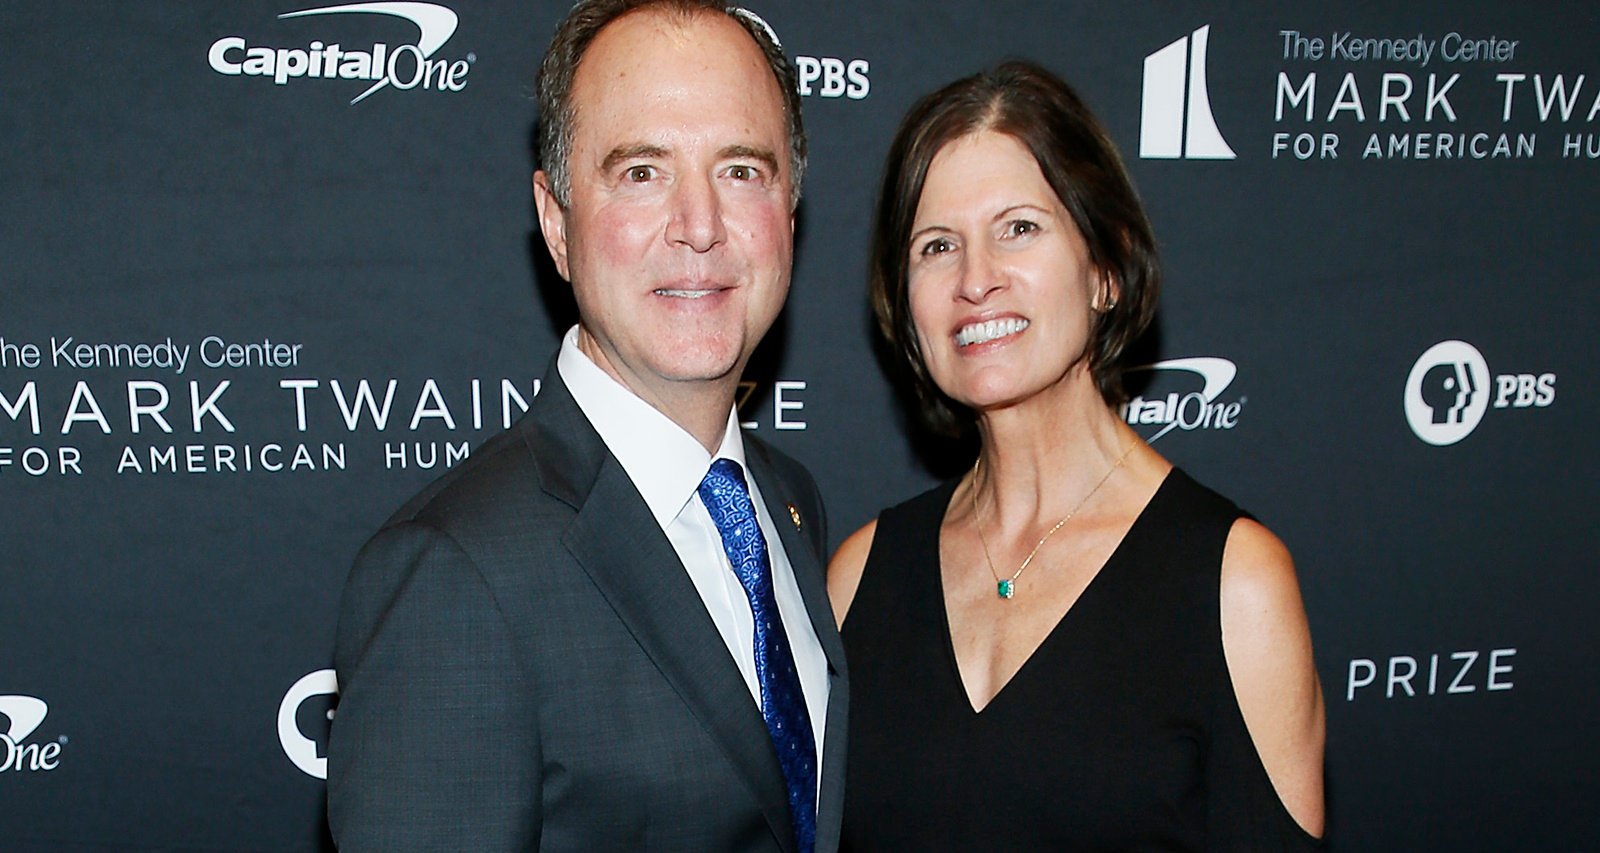 Adam Schiff’s Wife: Eve Schiff Wiki, Kids, Education and Facts You Need To Know